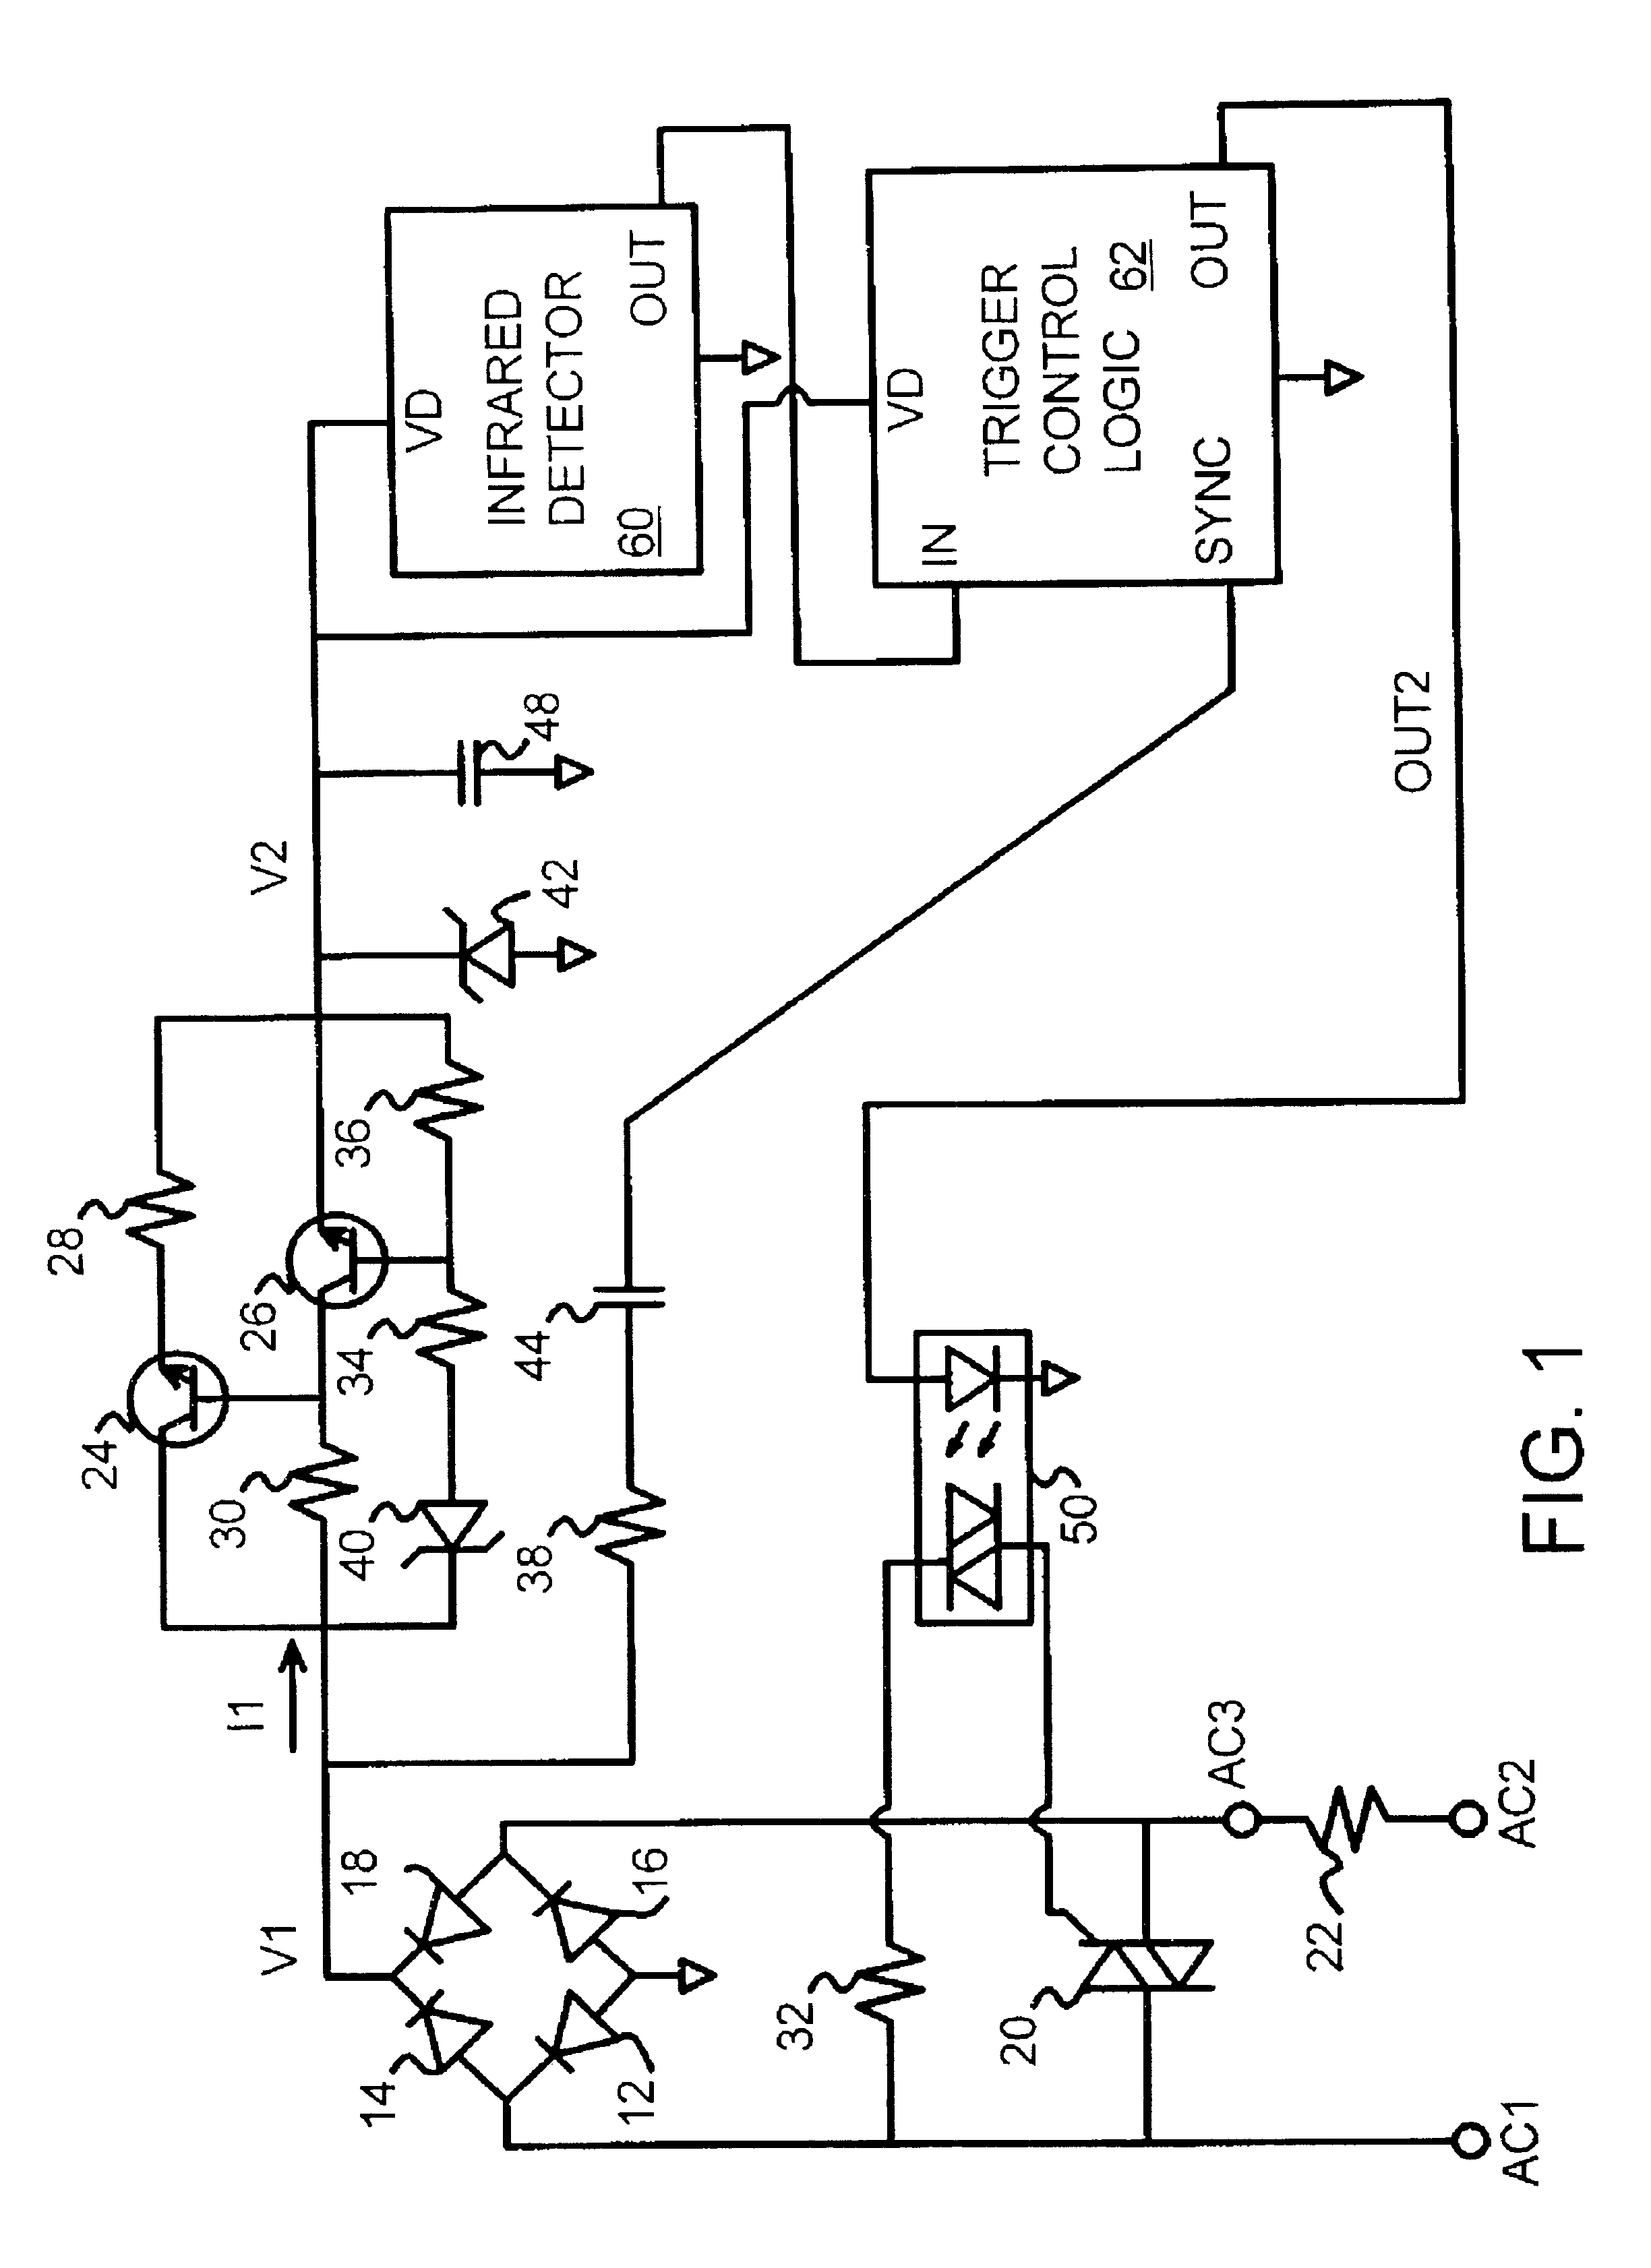 Infrared inductive light switch using triac trigger-control and early-charging-peak current limiter with adjustable power consumption